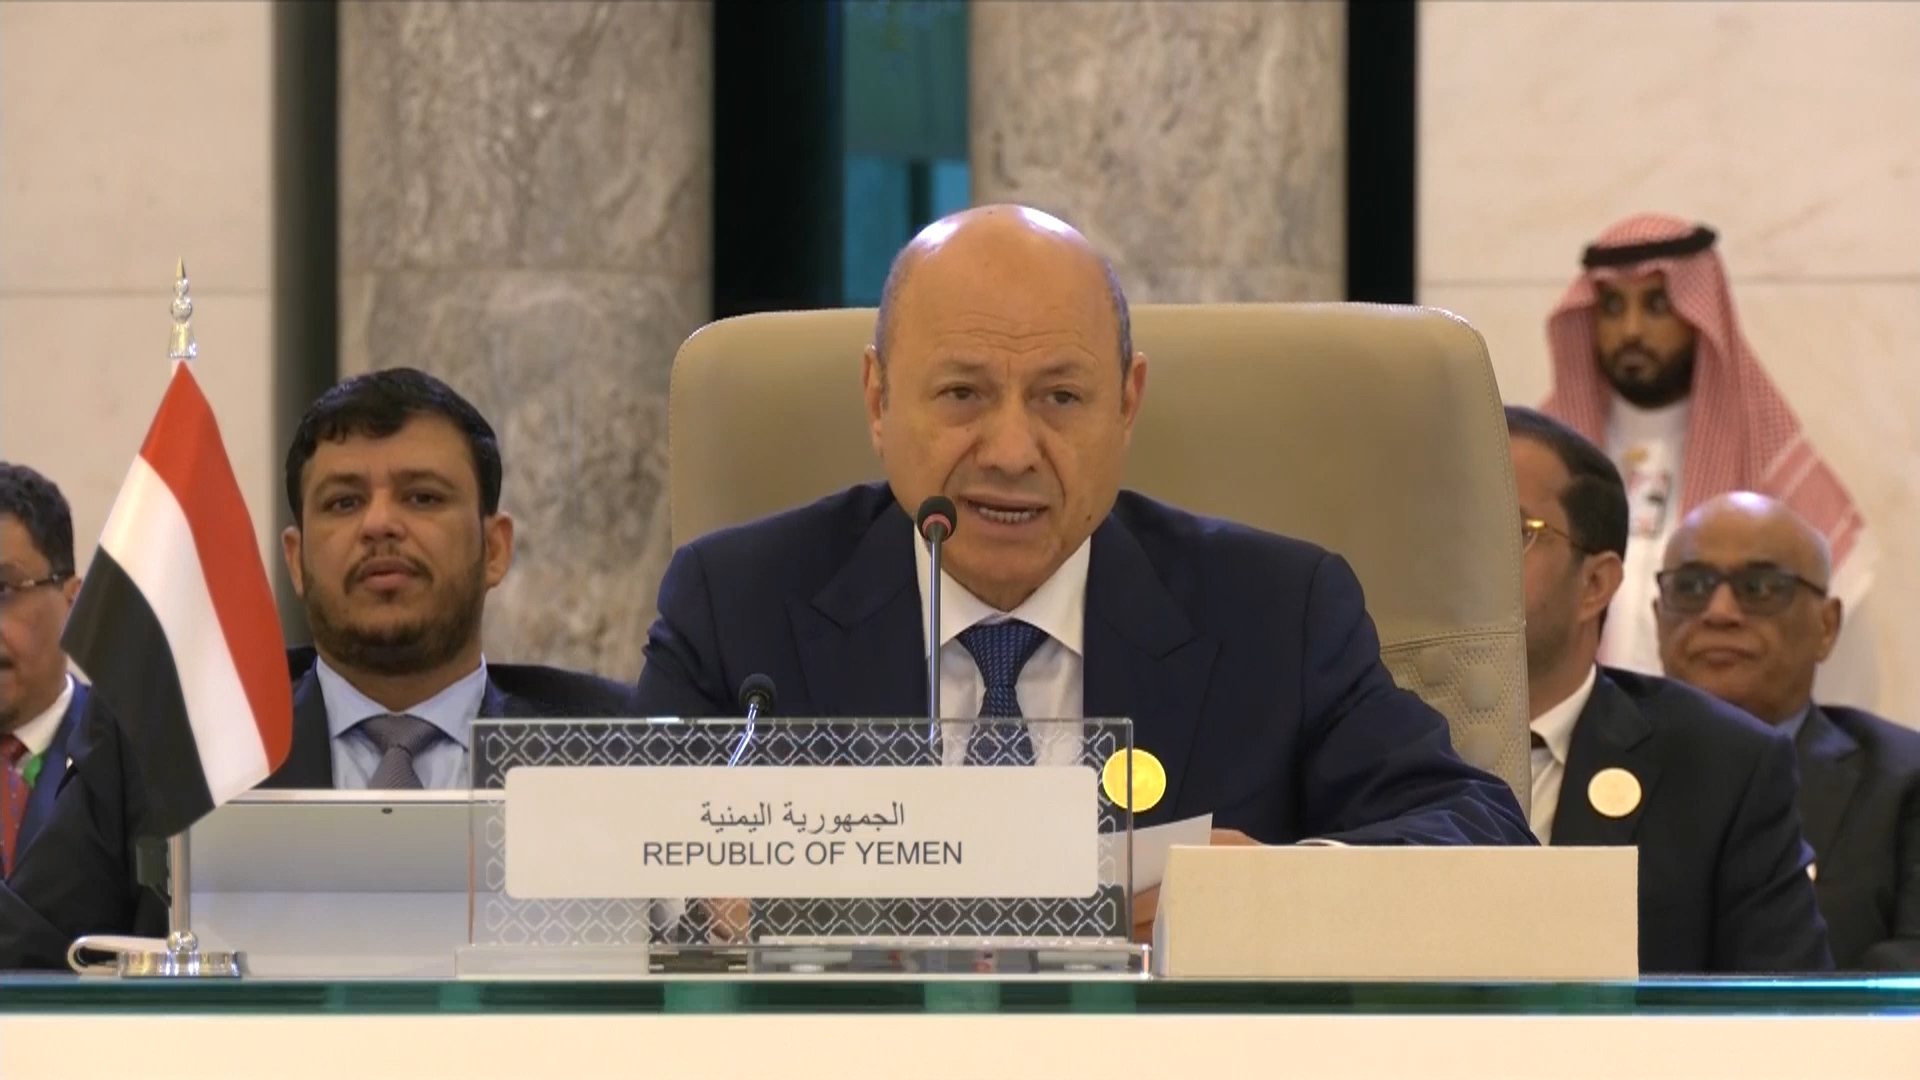 The speech of his Excellency Dr. Rashad Al-Alimi, President of the Presidential Leadership Council at the Jeddah, 32nd Arab League Summit, May 19, 2023 Jeddah